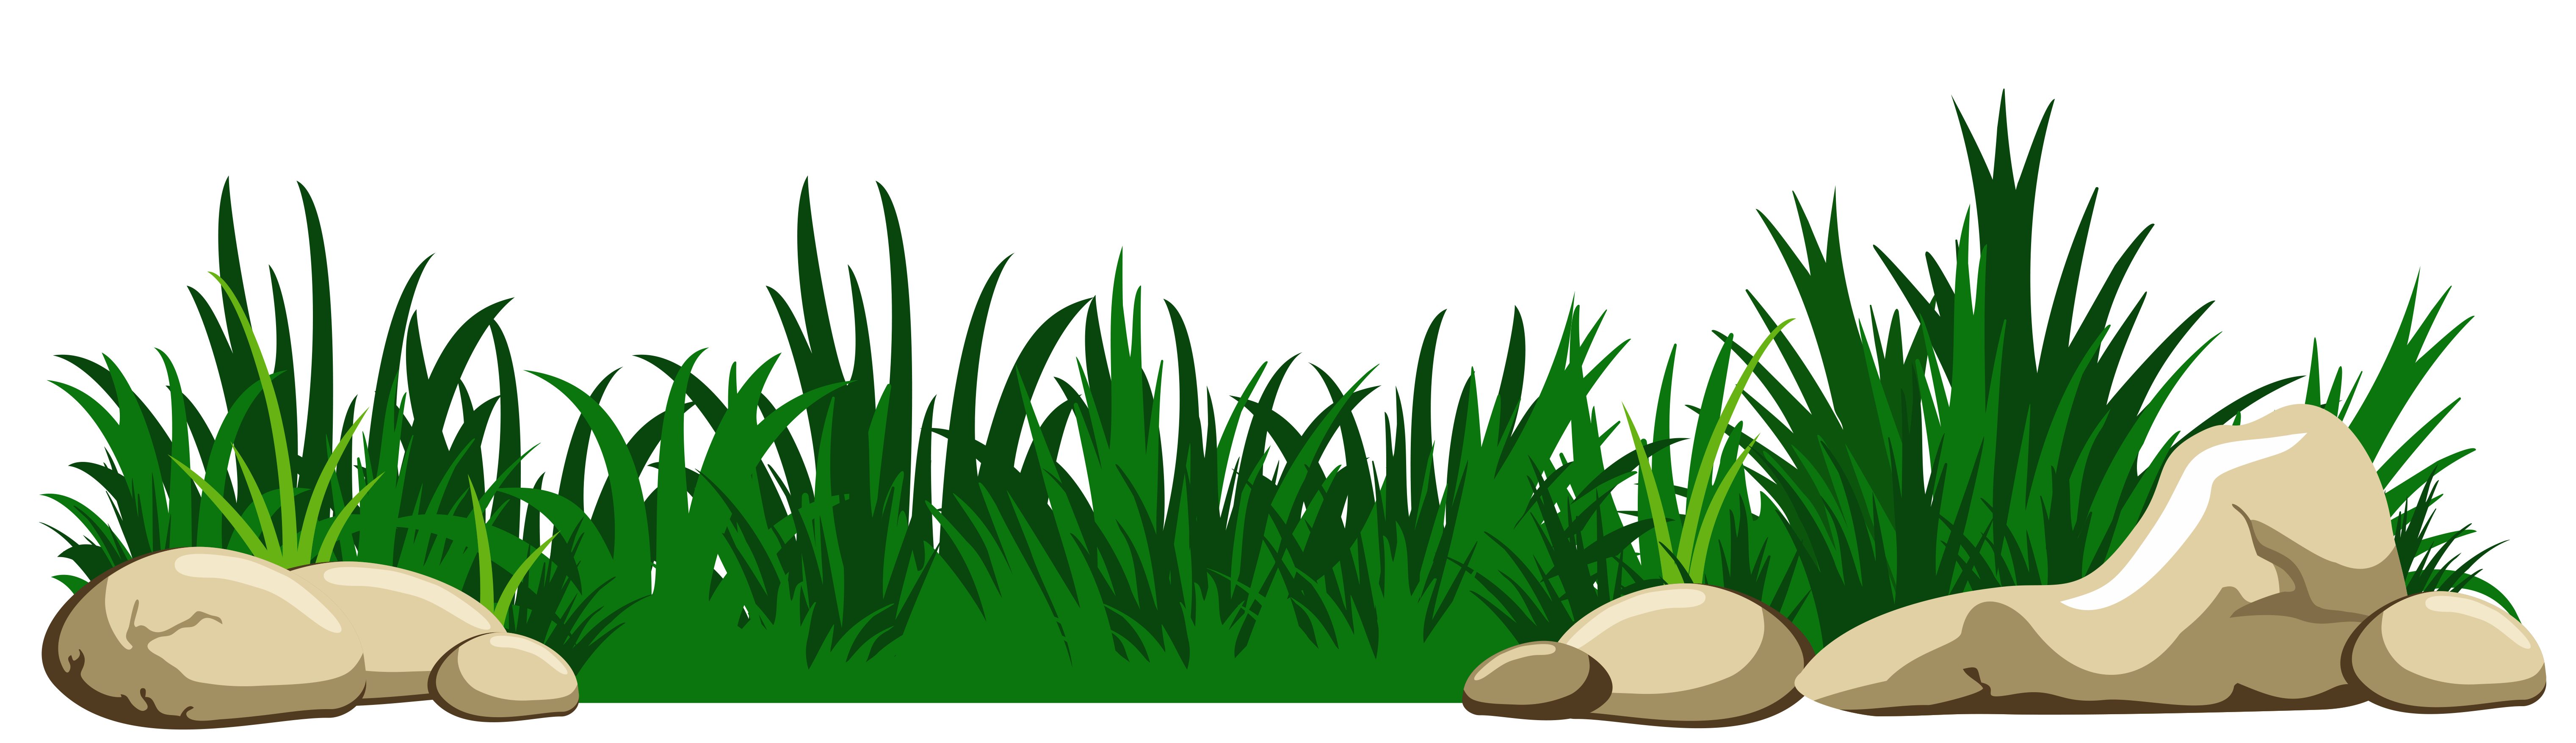 Grass With Rocks Transparent PNG Clipart Gallery Yopriceville